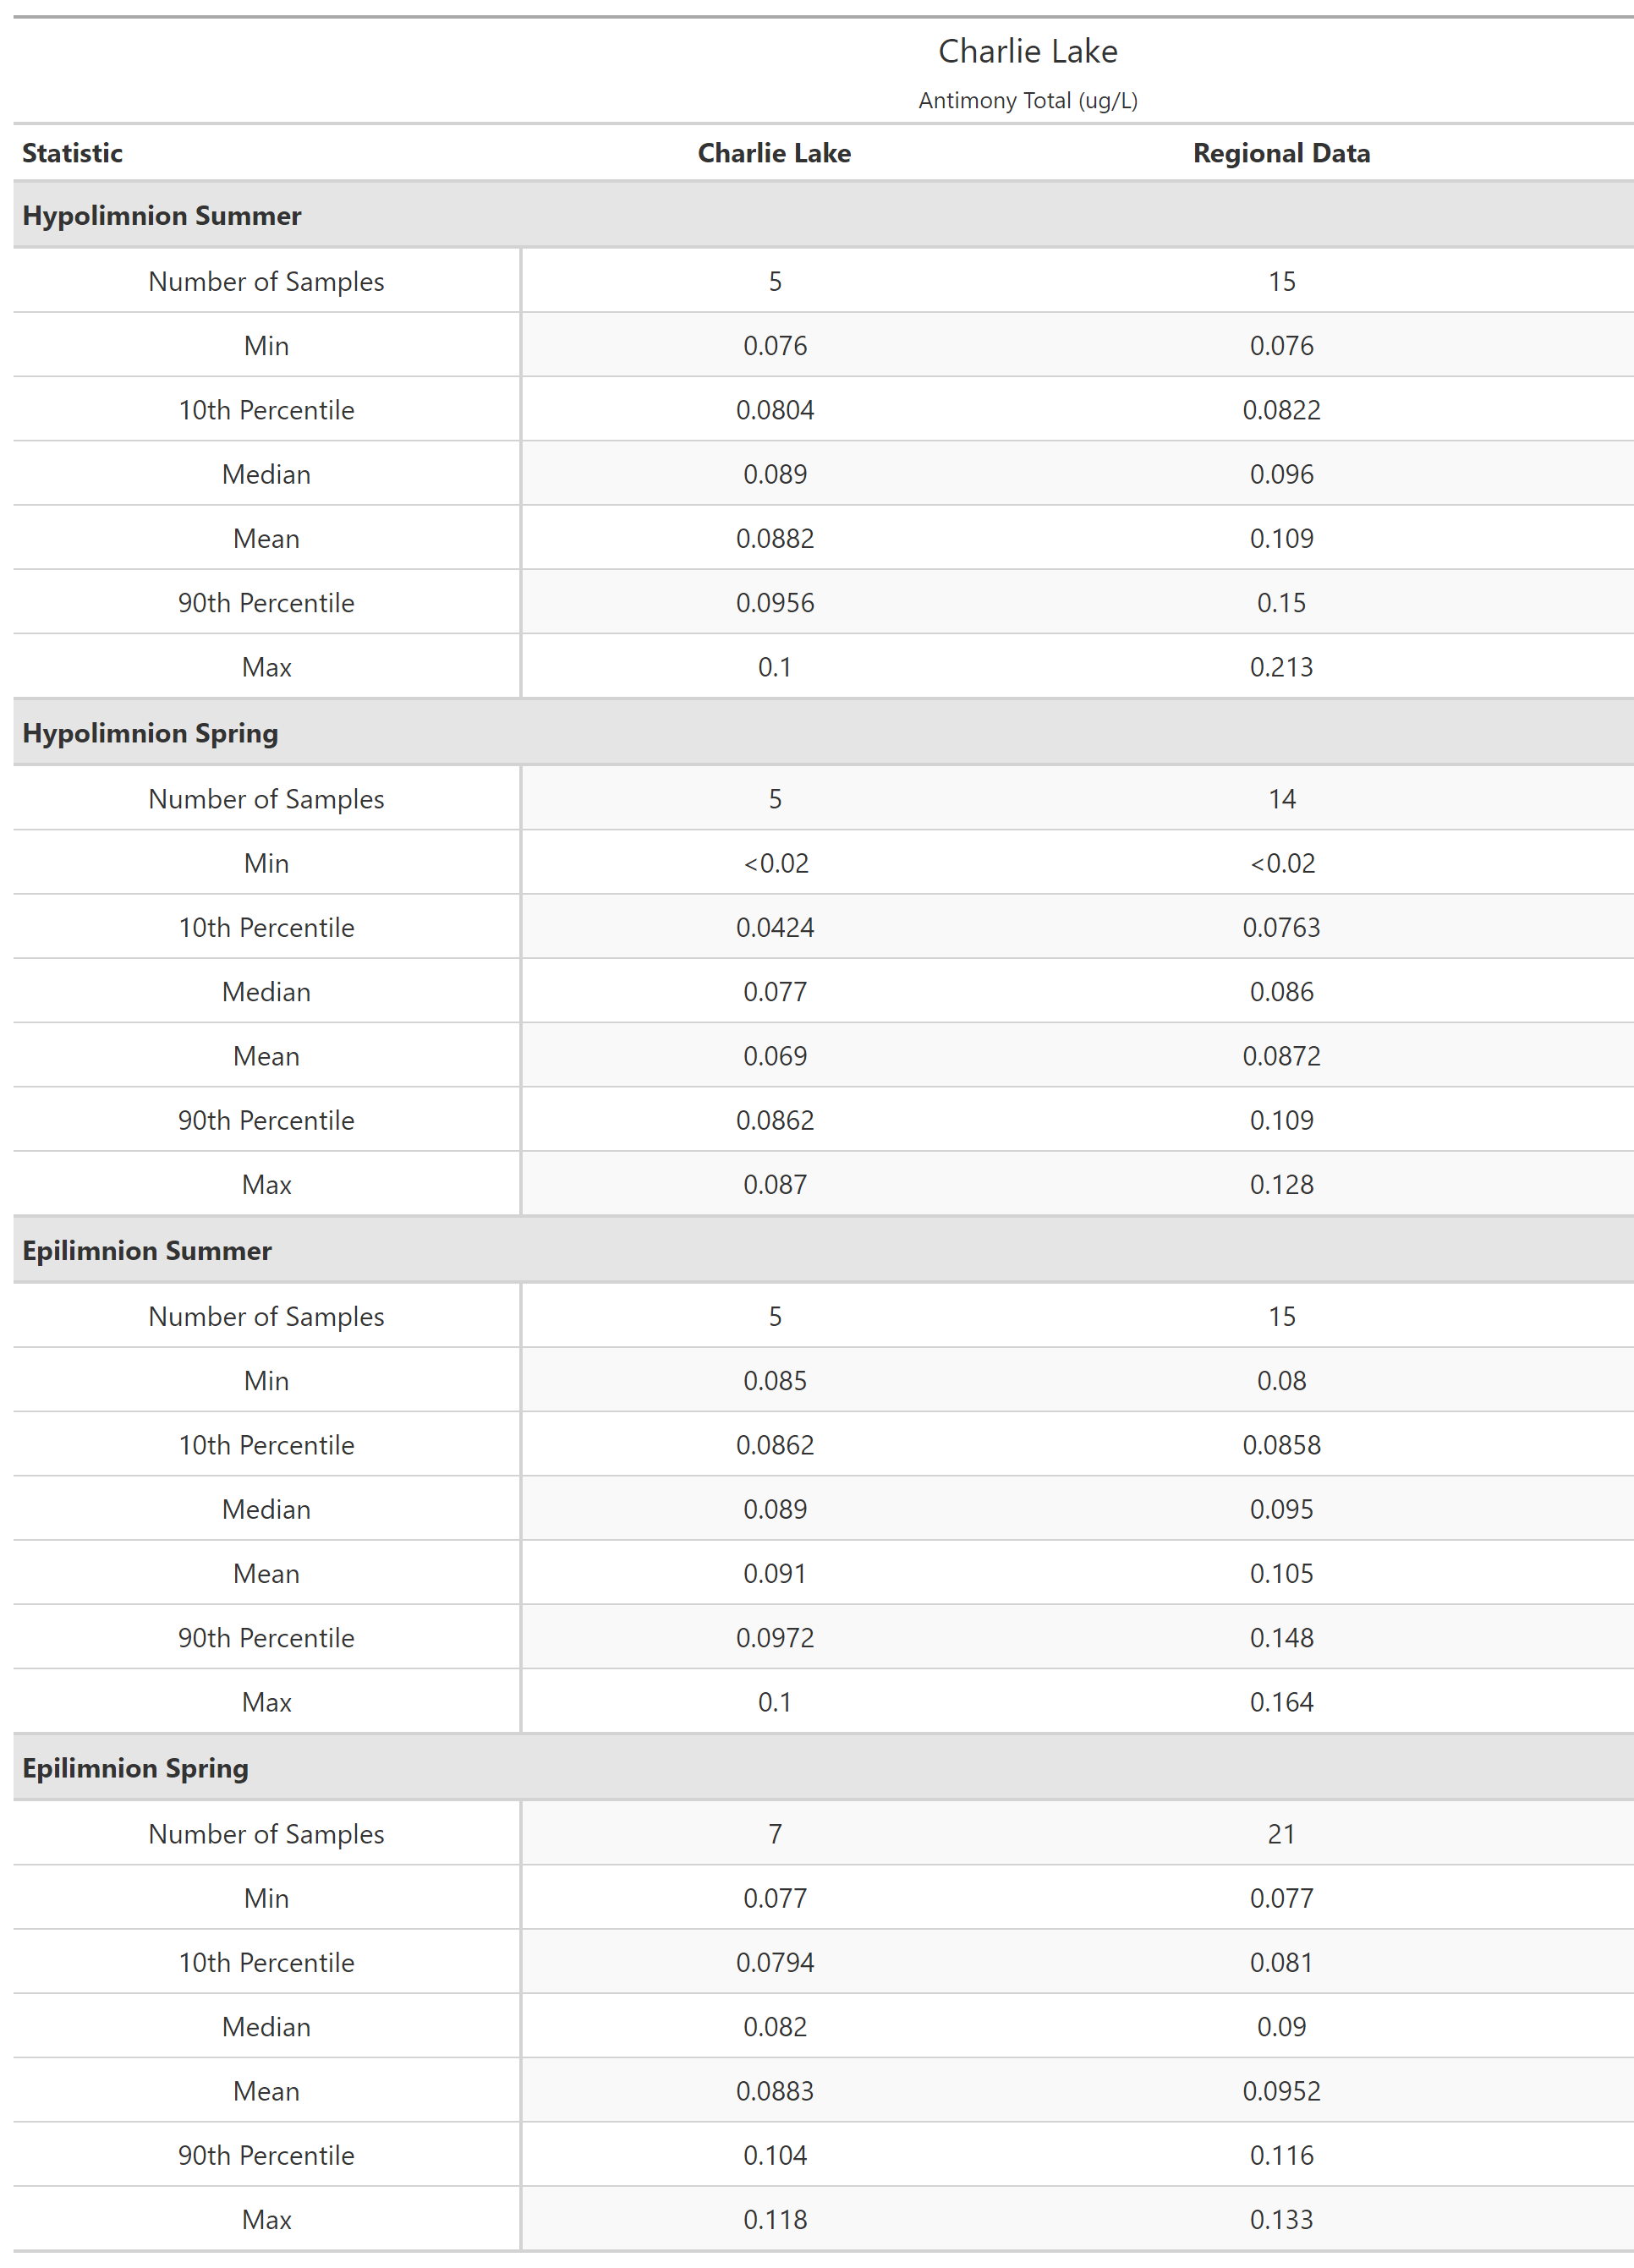 A table of summary statistics for Antimony Total with comparison to regional data